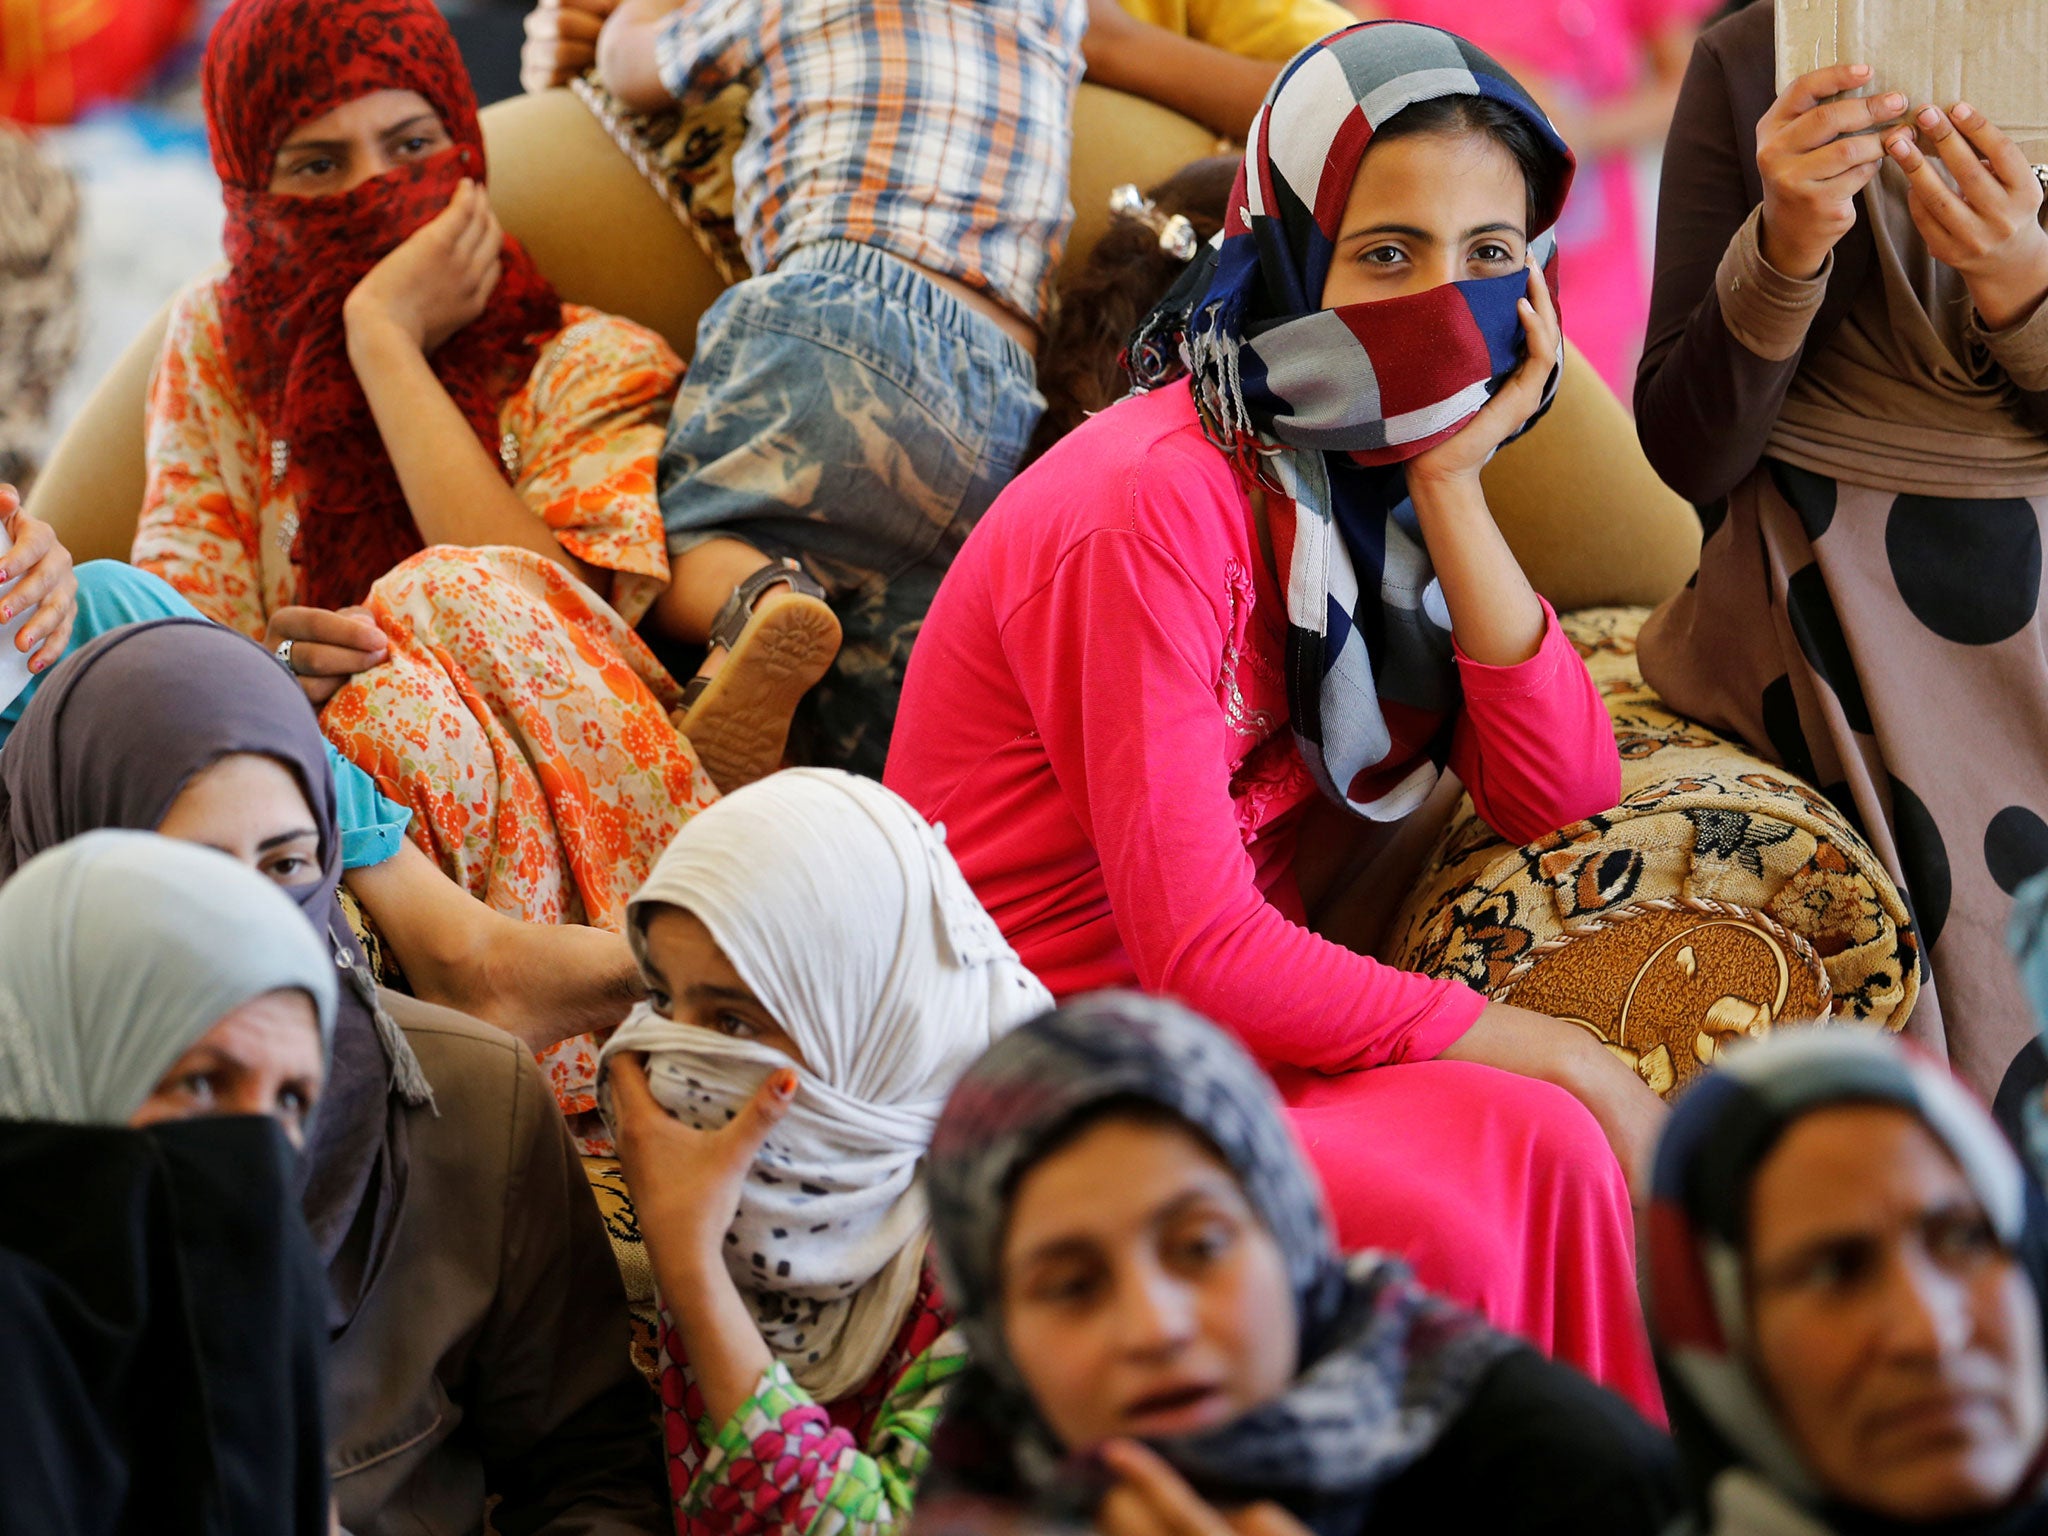 Civilians who fled their homes due to clashes on the outskirts of Fallujah, gather in the town of Garma, Iraq, on 30 May